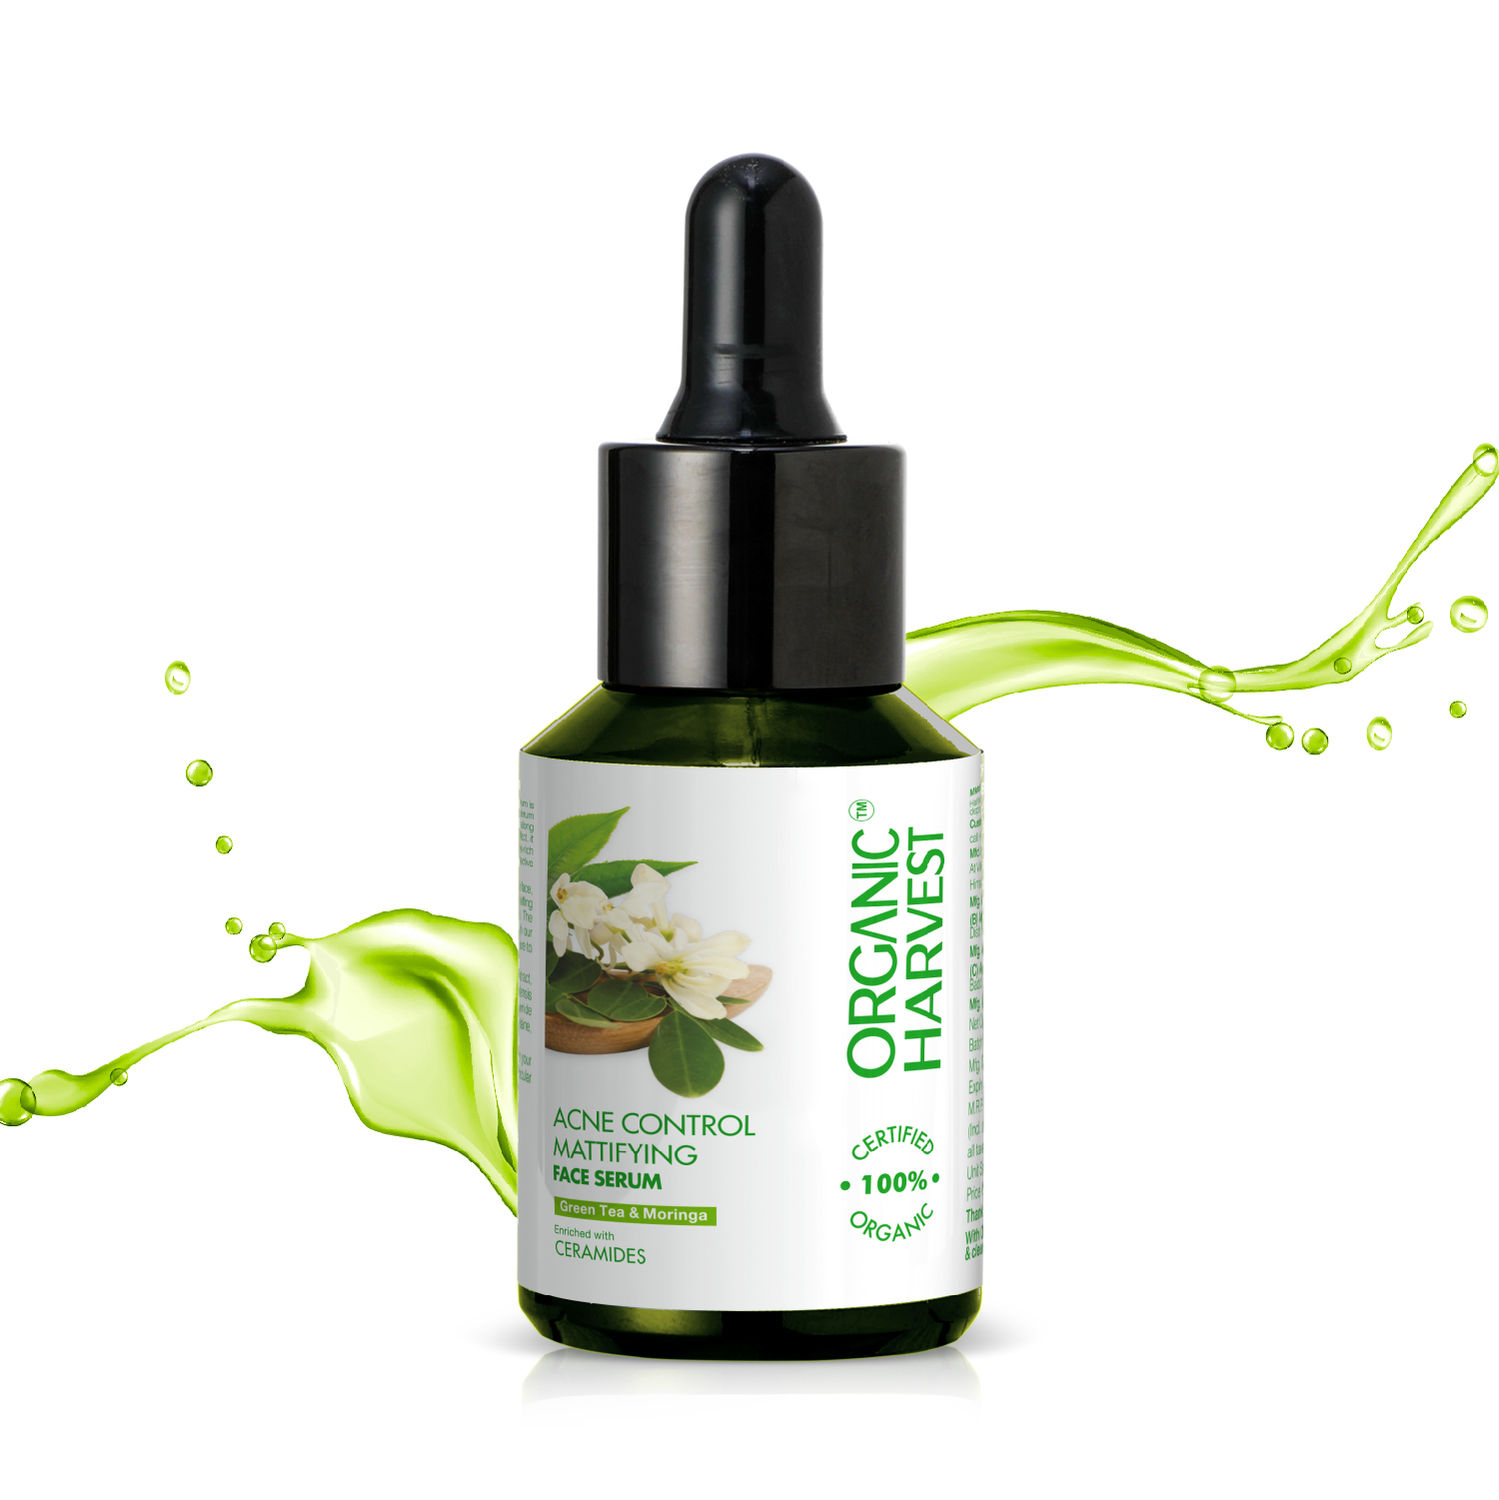 Buy Organic Harvest Vitamin B Organic Face Serum with Niacinamide and Spinach, 30 ml, Suitable for Oily and Combination Skin Types, Removes Appearance of Acne and Pimples - Purplle